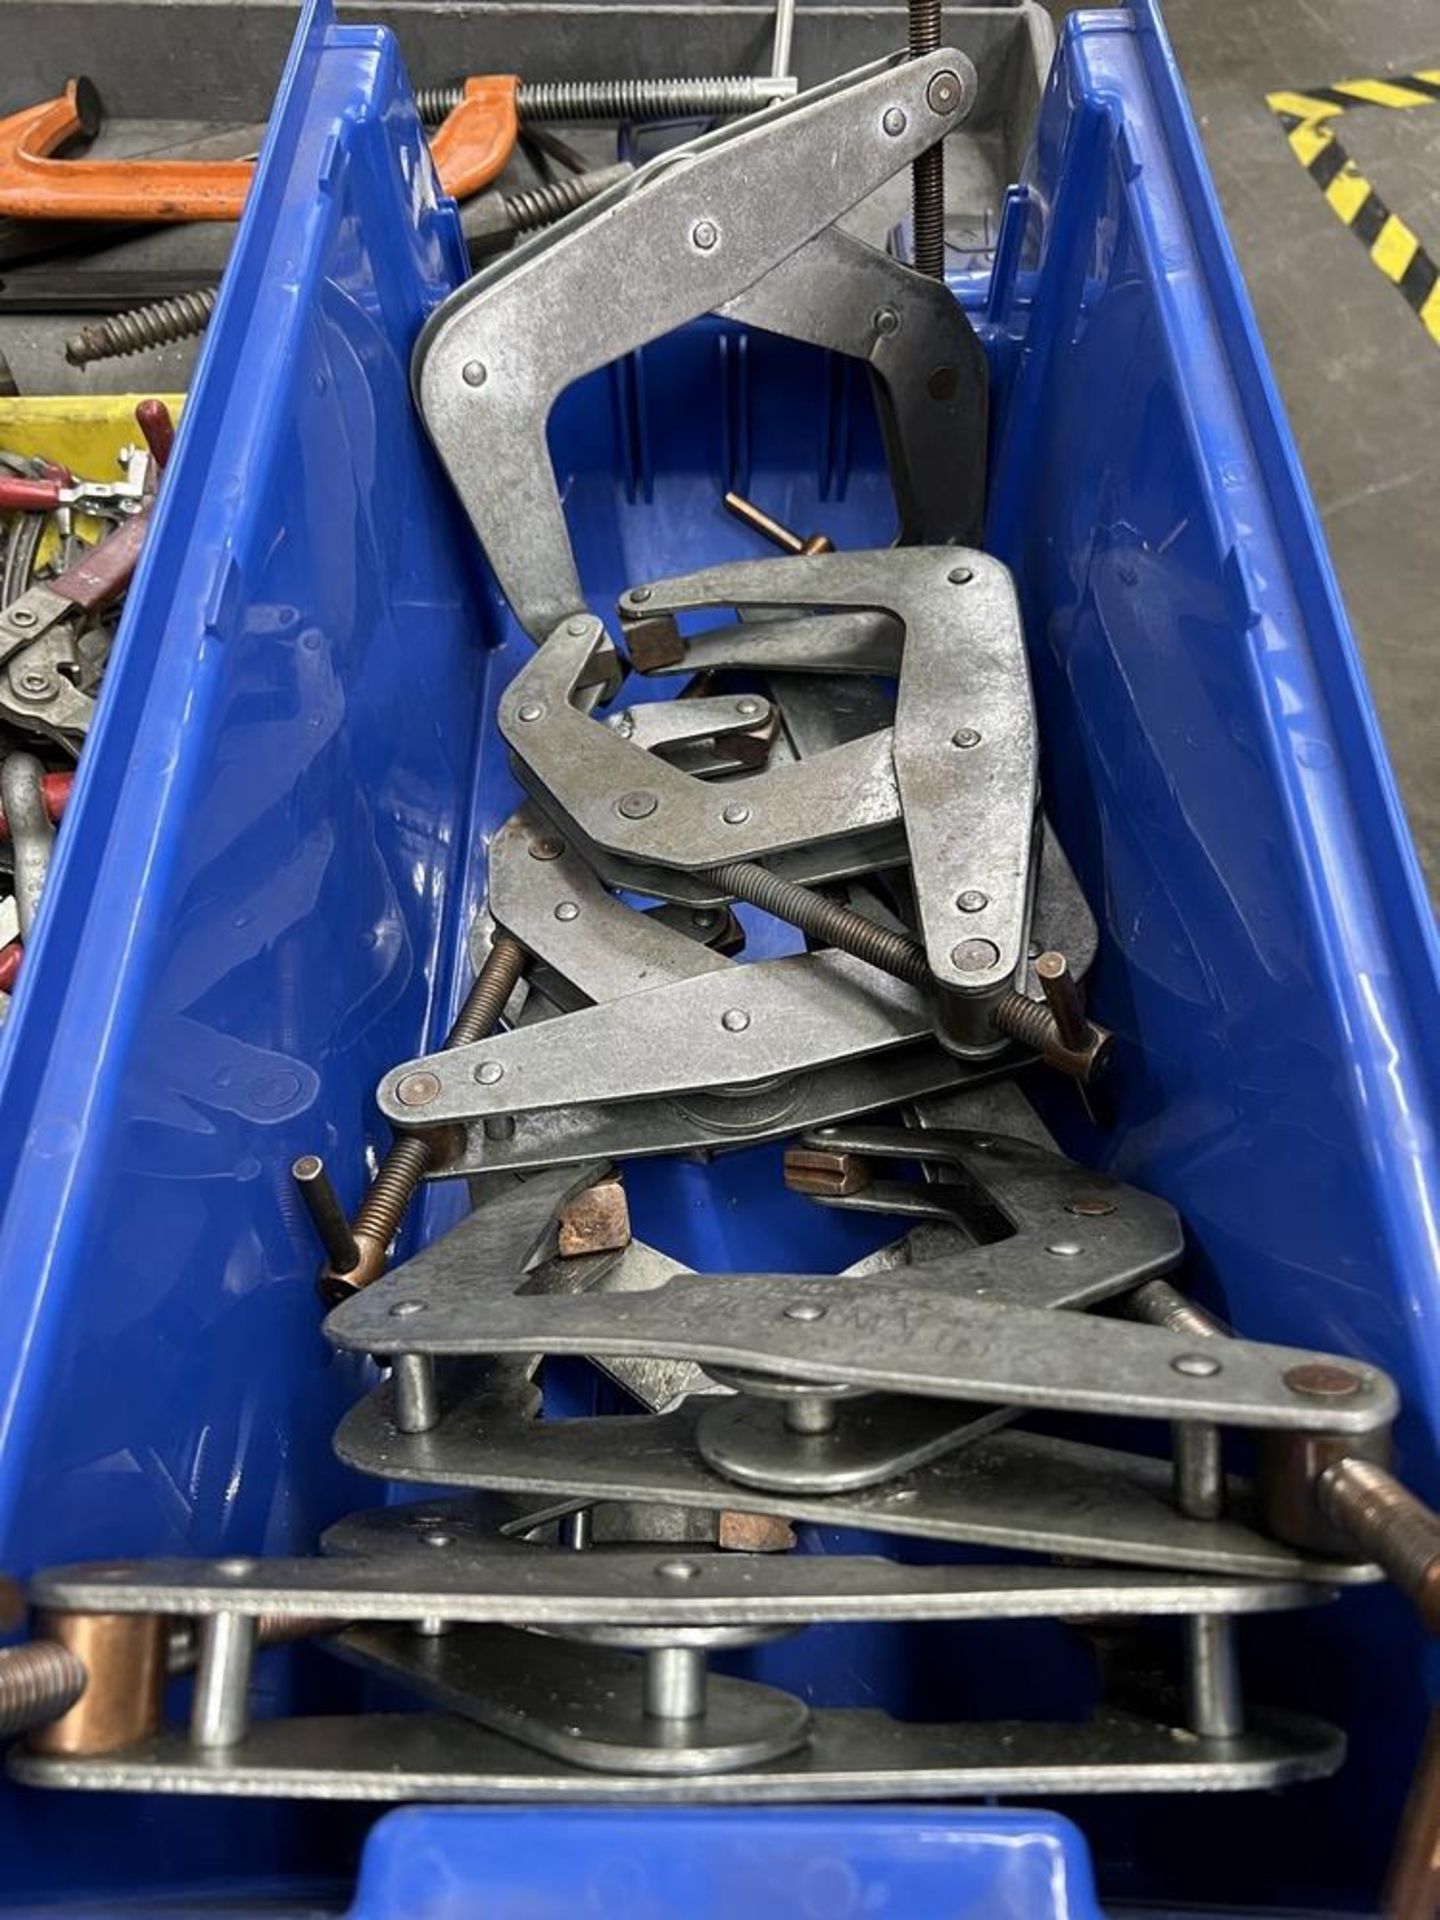 Large Lot of Table Clamps, C Clamps & Vise Clamps - Image 8 of 9